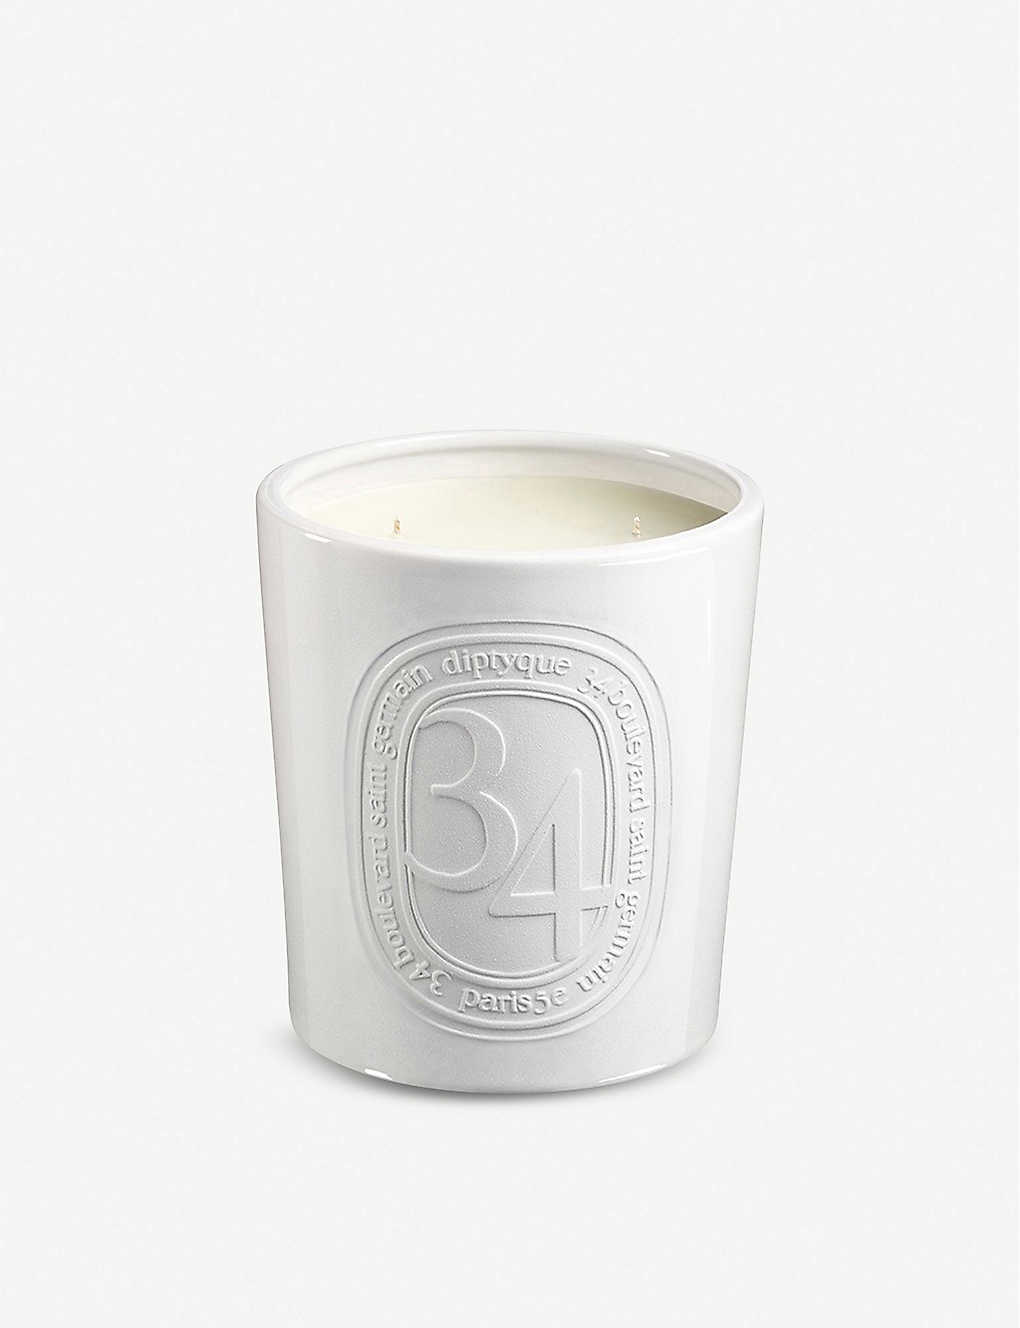 Diptyque 34 Boulevard Saint Germain Scented Candle 1.5kg In Na